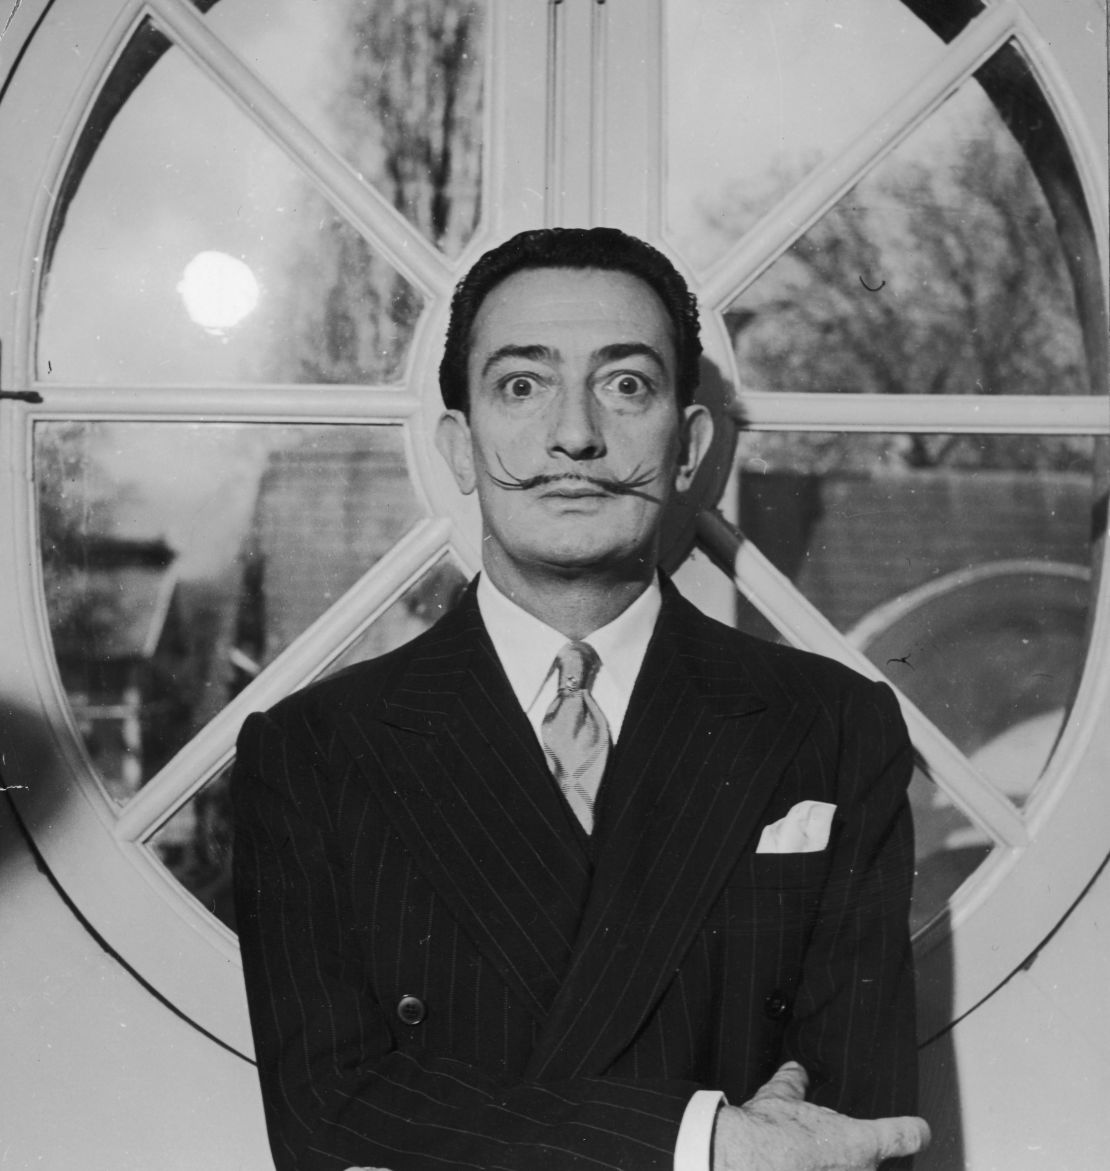 Salvador Dali negotiated fame and controversy throughout his prolific career.